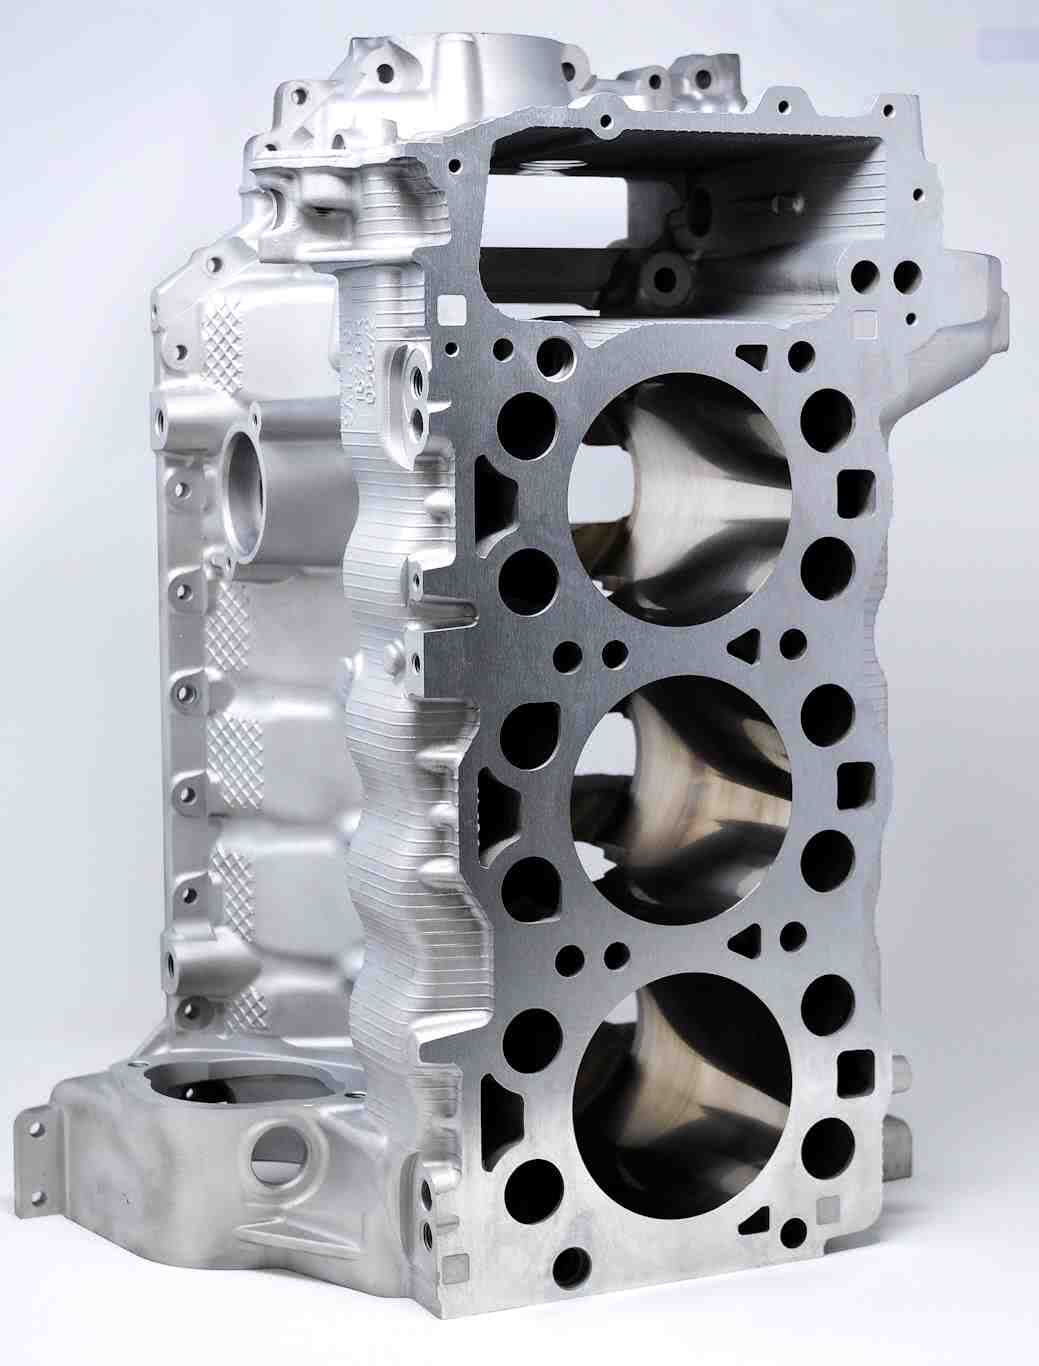 Nickies Lite Reconditioned Porsche MA1 (9A1) Engine Block with Nikasil plated cylinder bores and resurfaced deck.